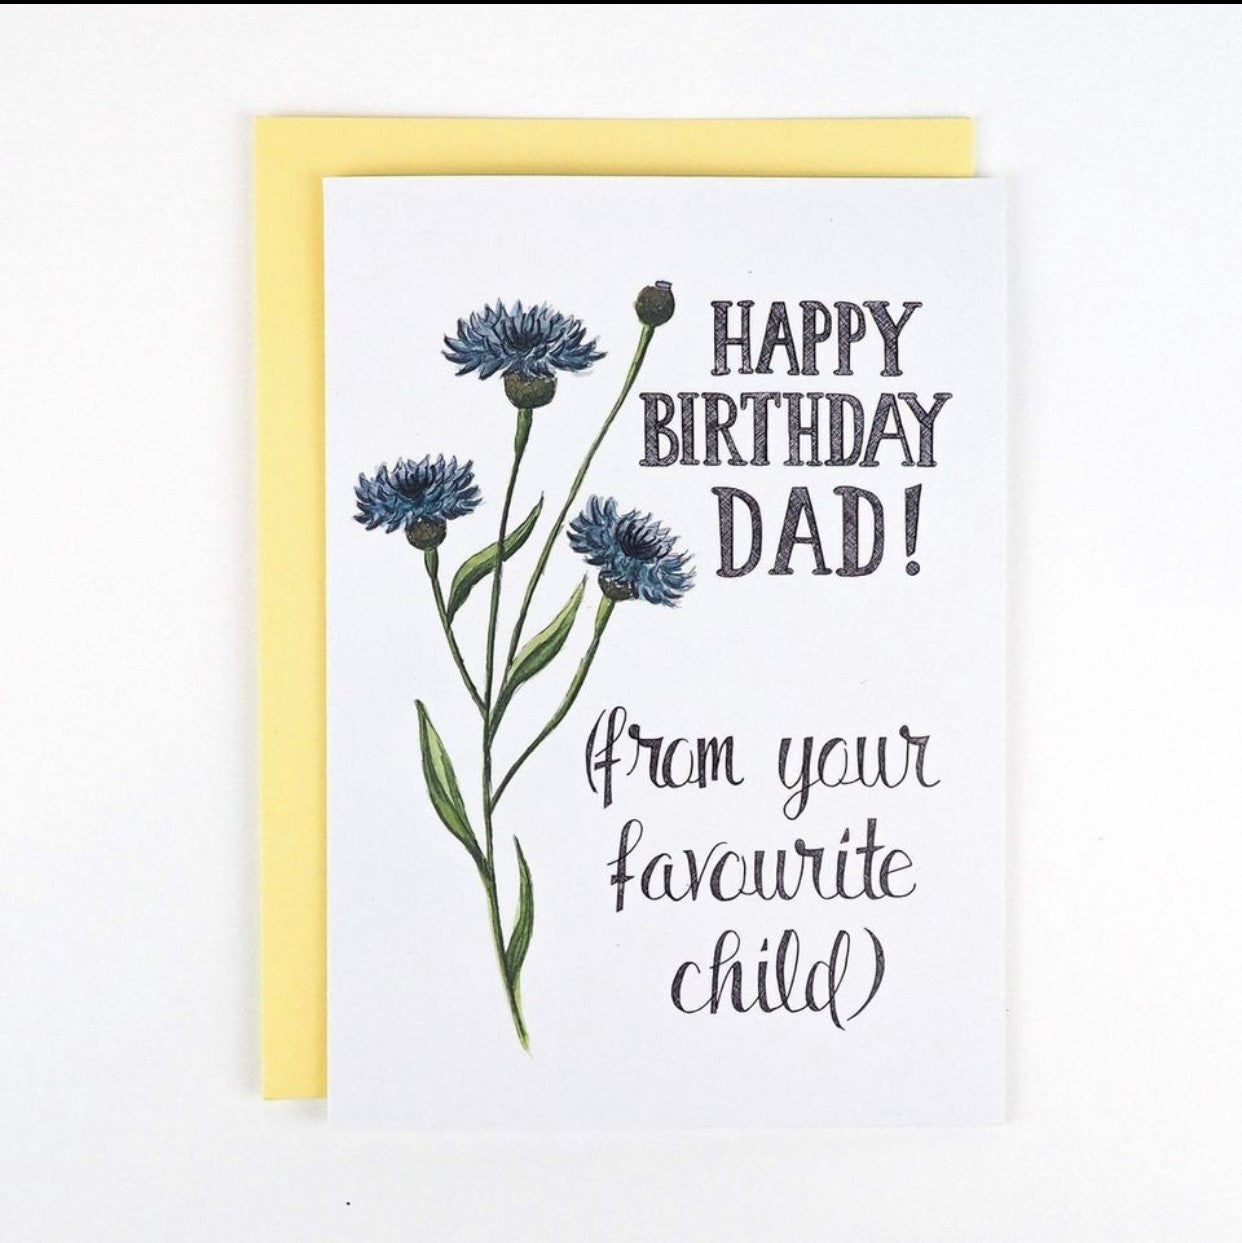 Happy Birthday Dad! (From Your Favourite Child) Card